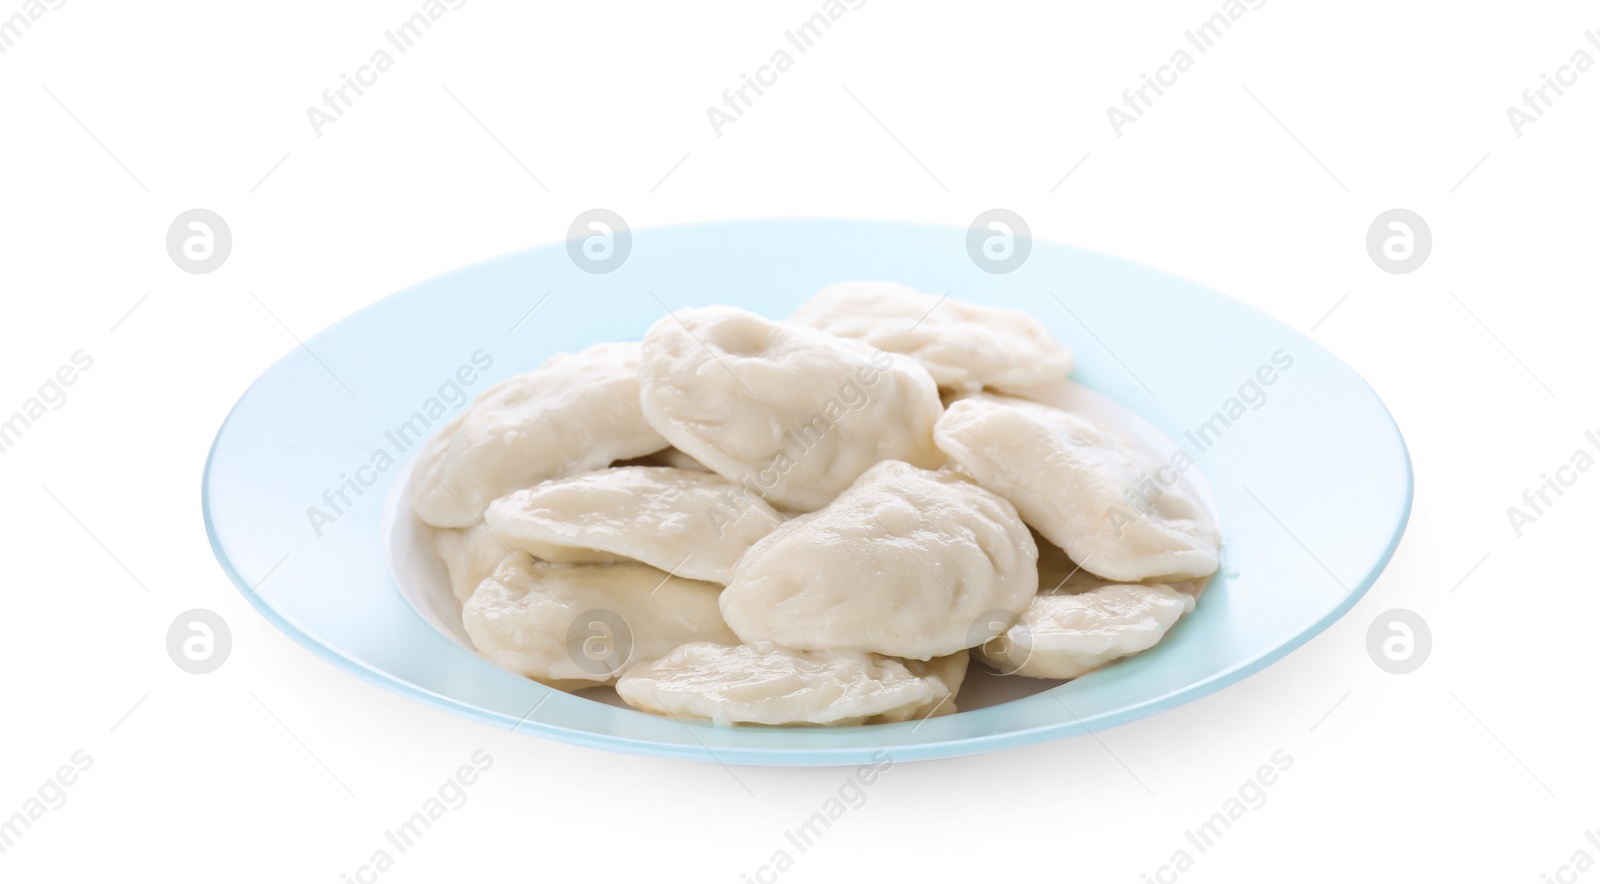 Photo of Plate with tasty dumplings (varenyky) on white background